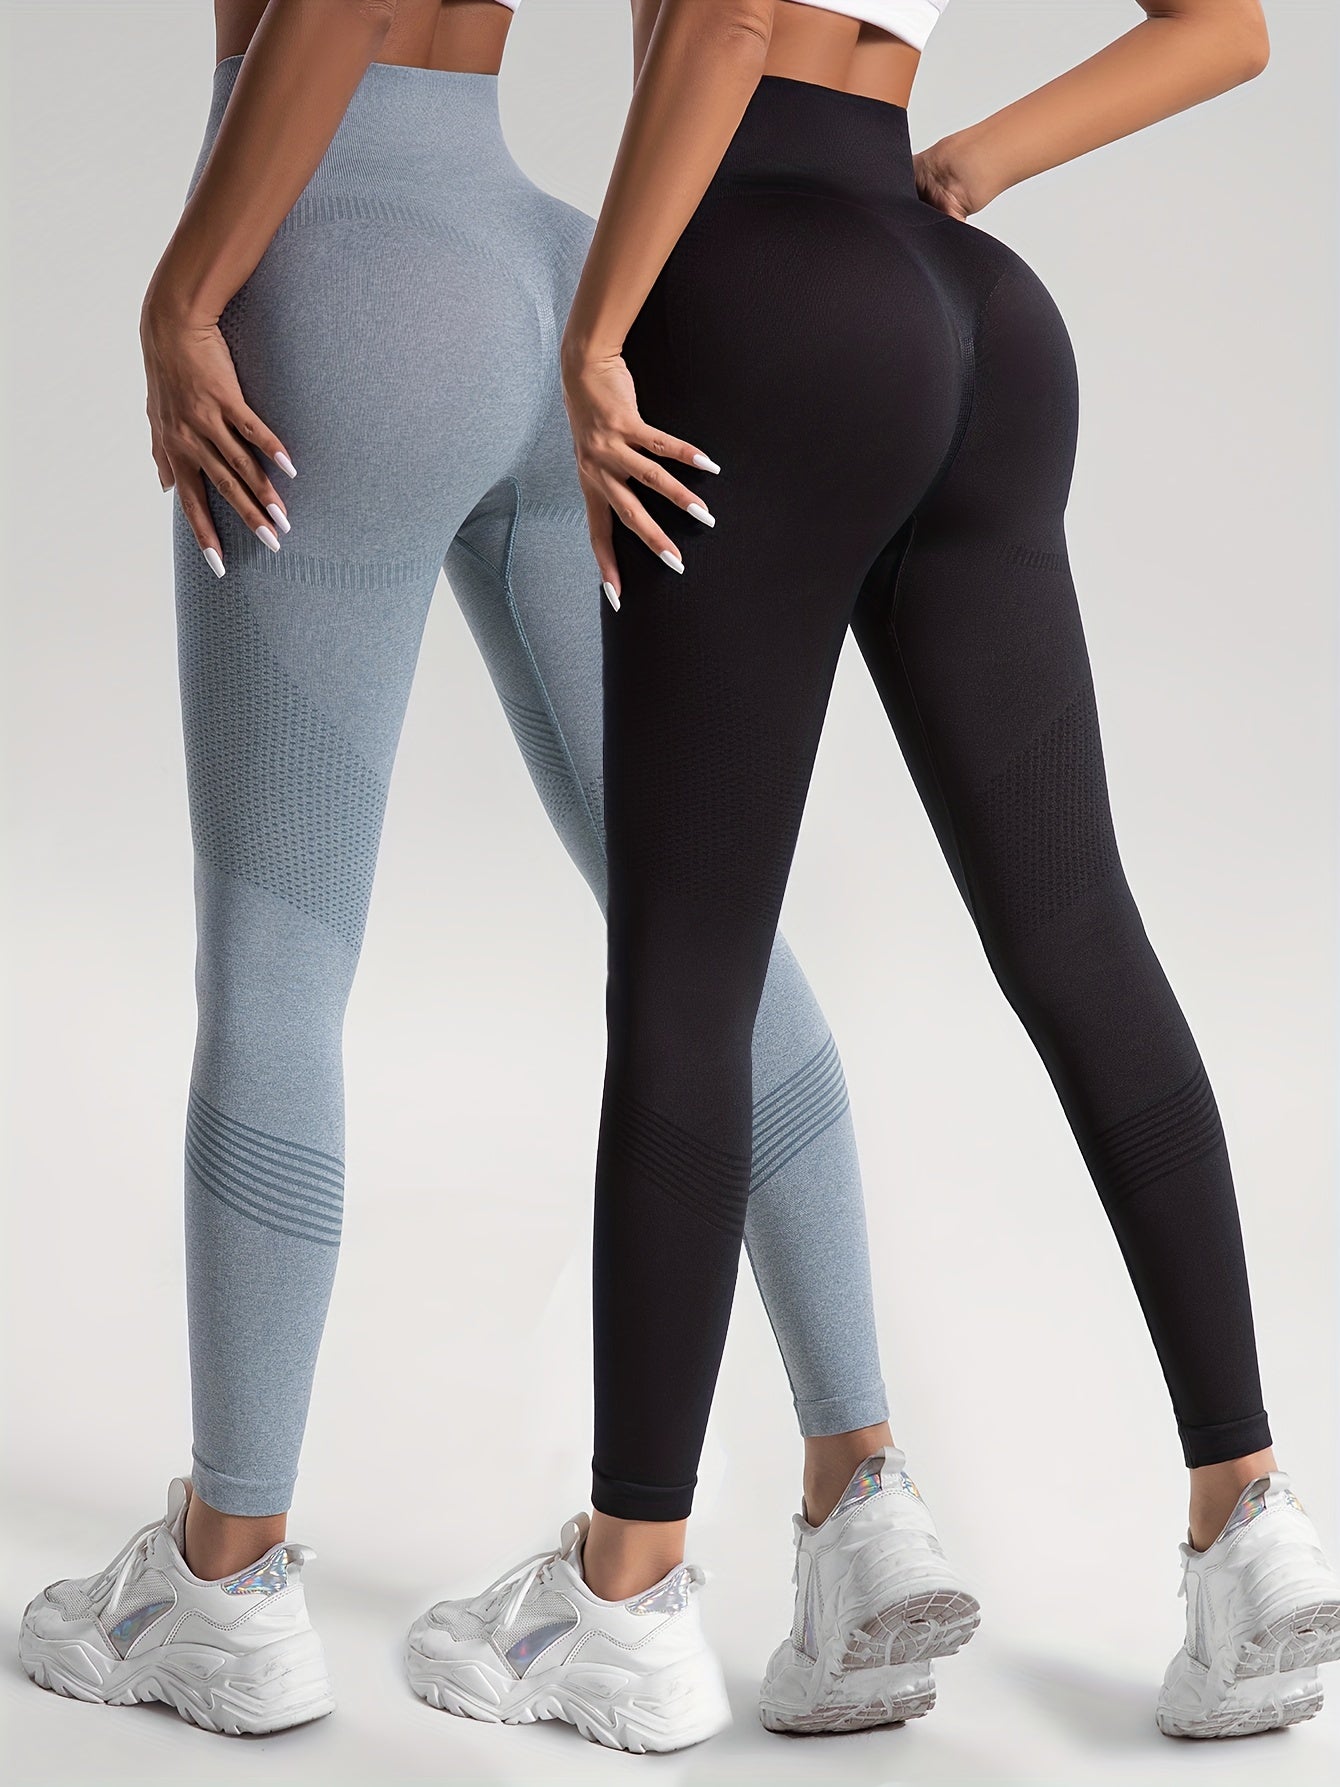 2pcs Solid Color High-Stretch Fitness Yoga Sports Leggings, Soft Breathable Yoga Tight Pants, Women's Activewear